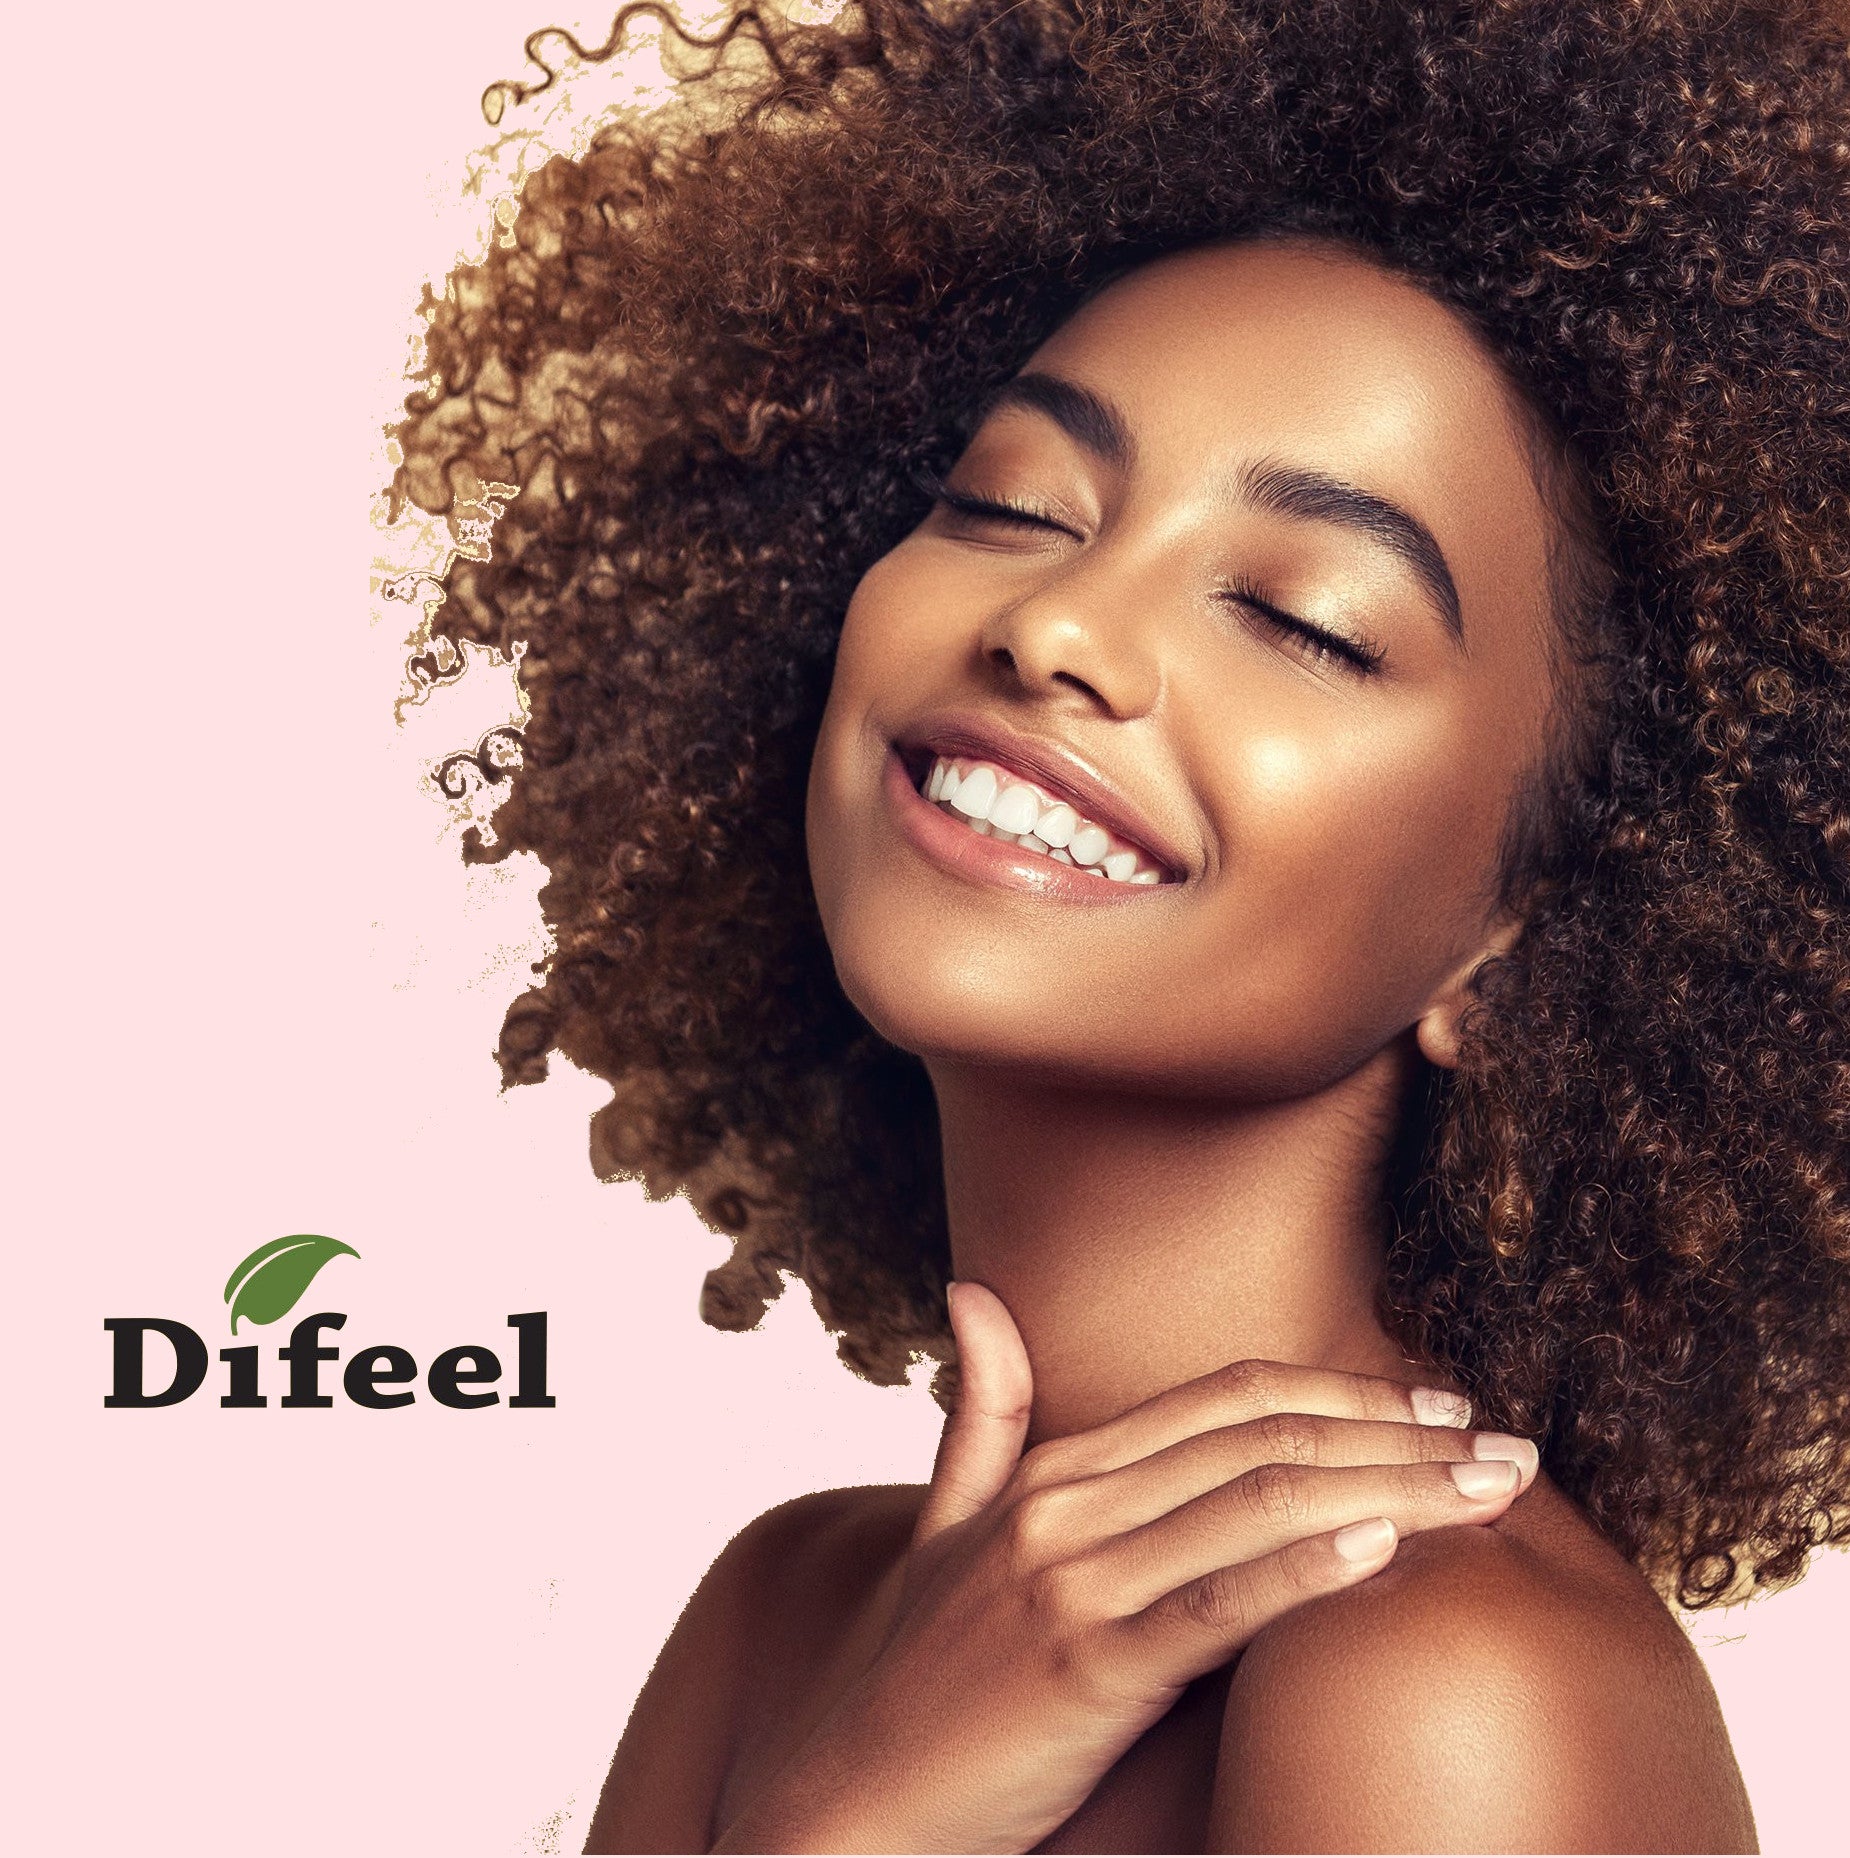 Difeel 99% Natural Hair Care Solutions - Anti-frizz Hair Oil 7.1 oz. (PACK OF 2)